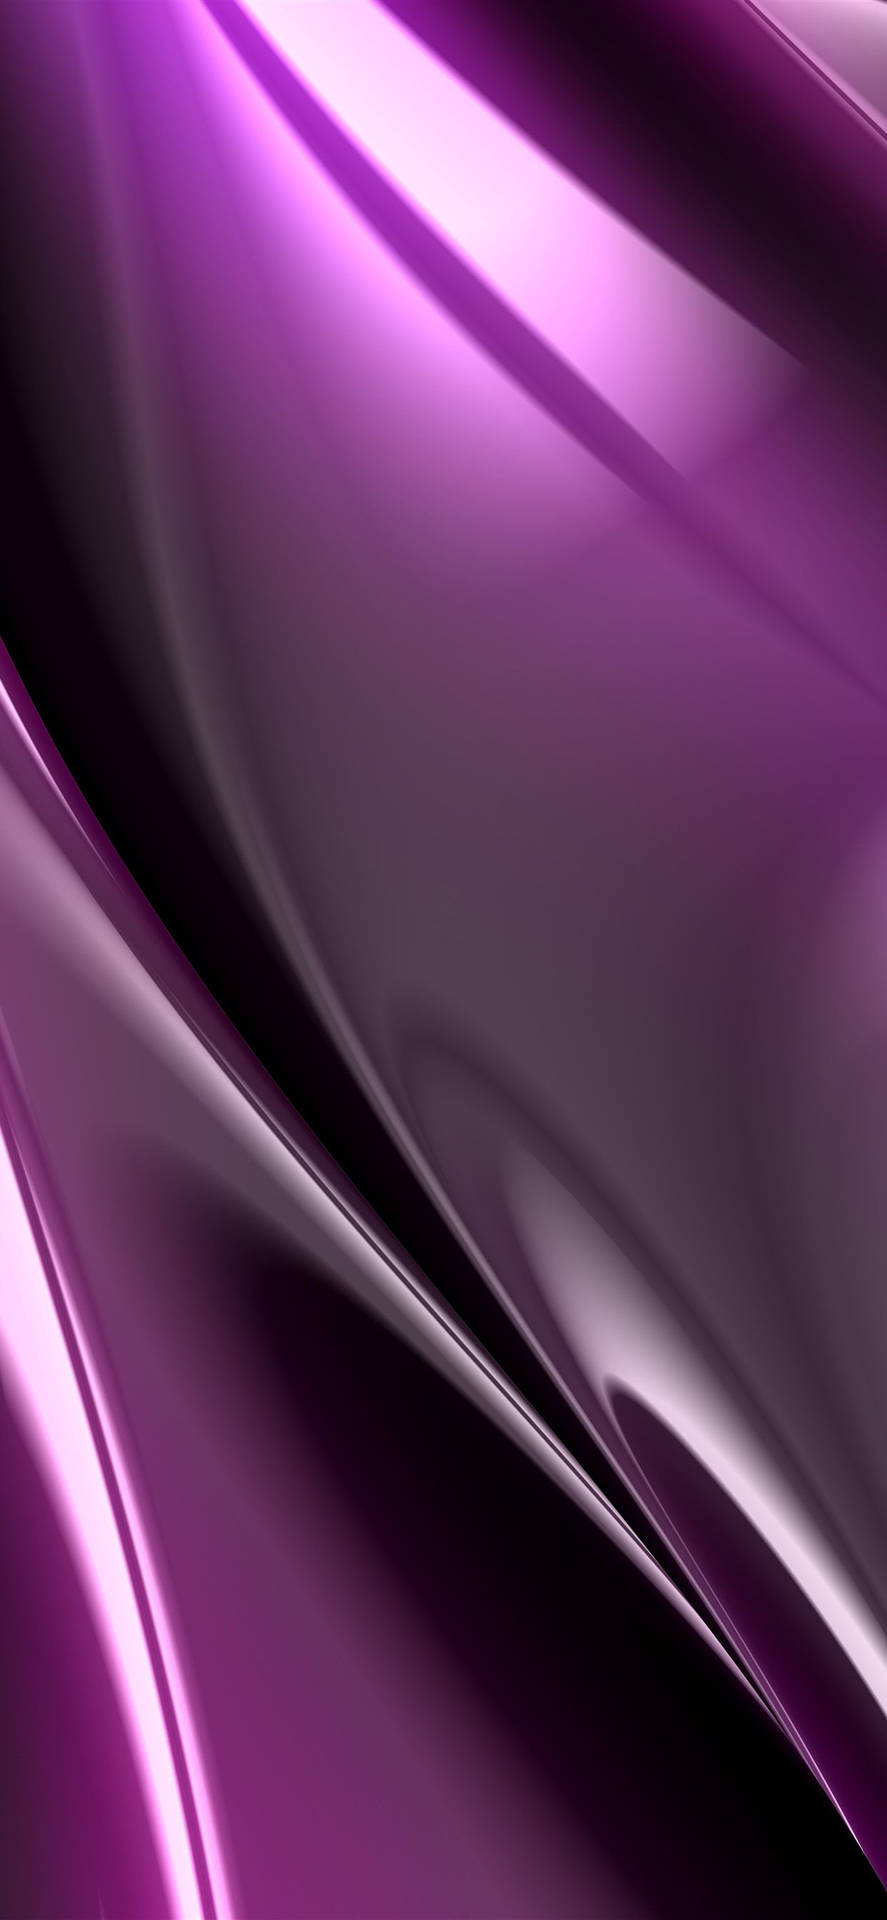 Free Iphone 11 Purple Wallpaper Downloads, [100+] Iphone 11 Purple  Wallpapers for FREE 